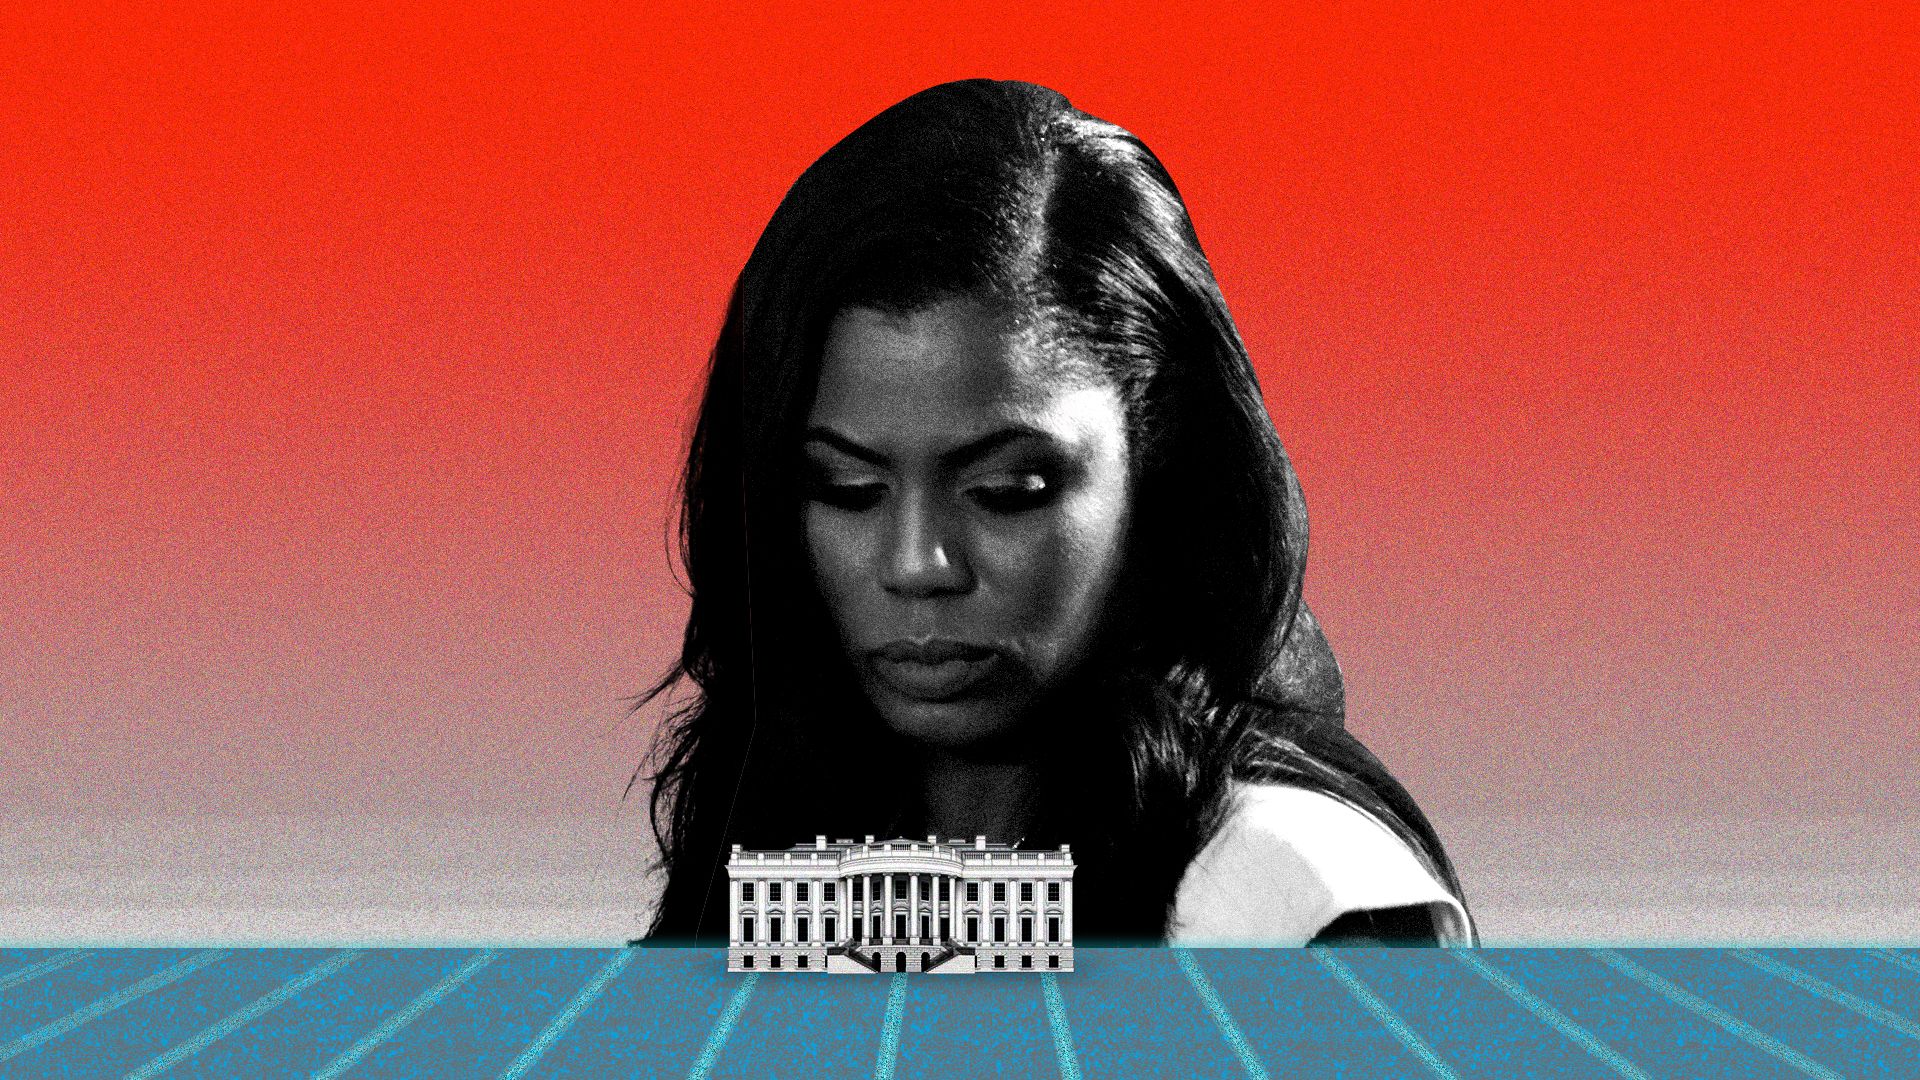 This is a photo of Omarosa Manigault looming over the White House